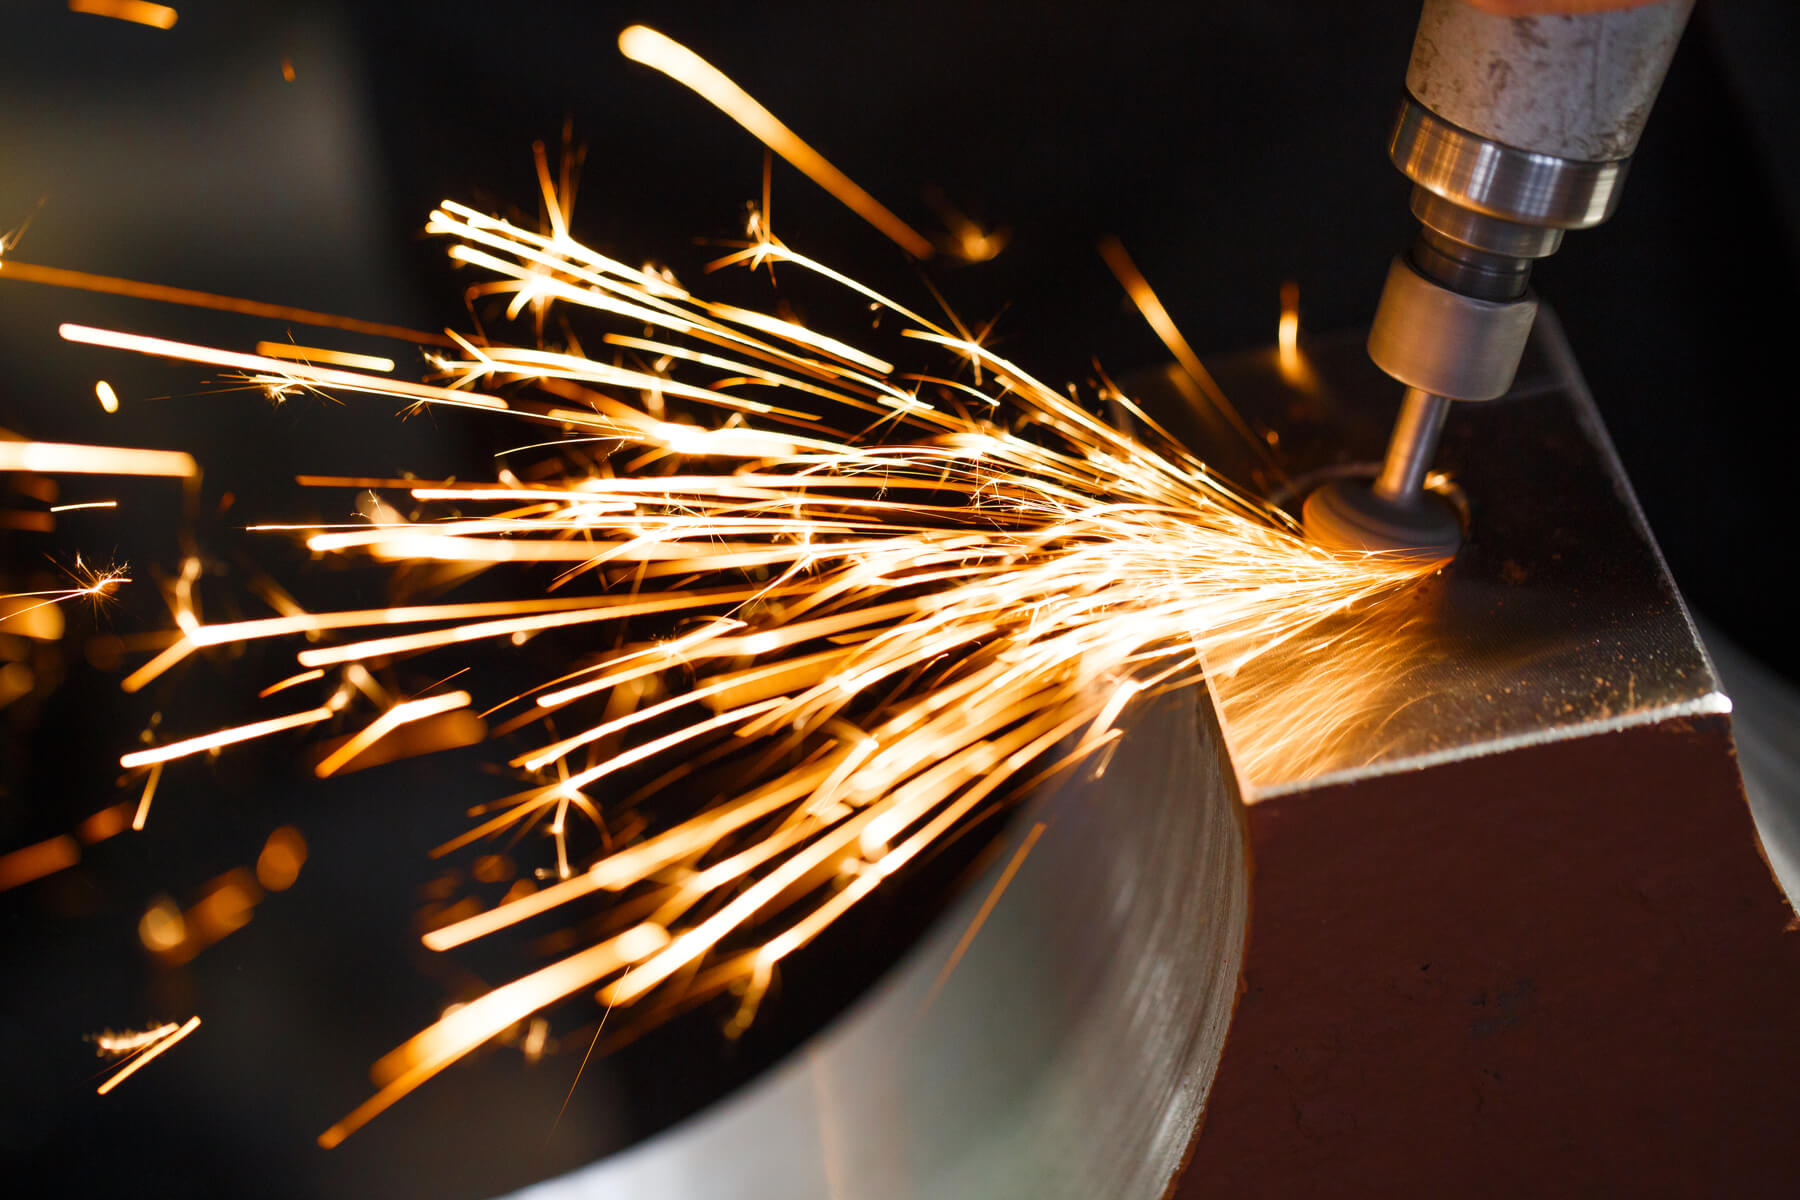 sparks flying from a metal tool